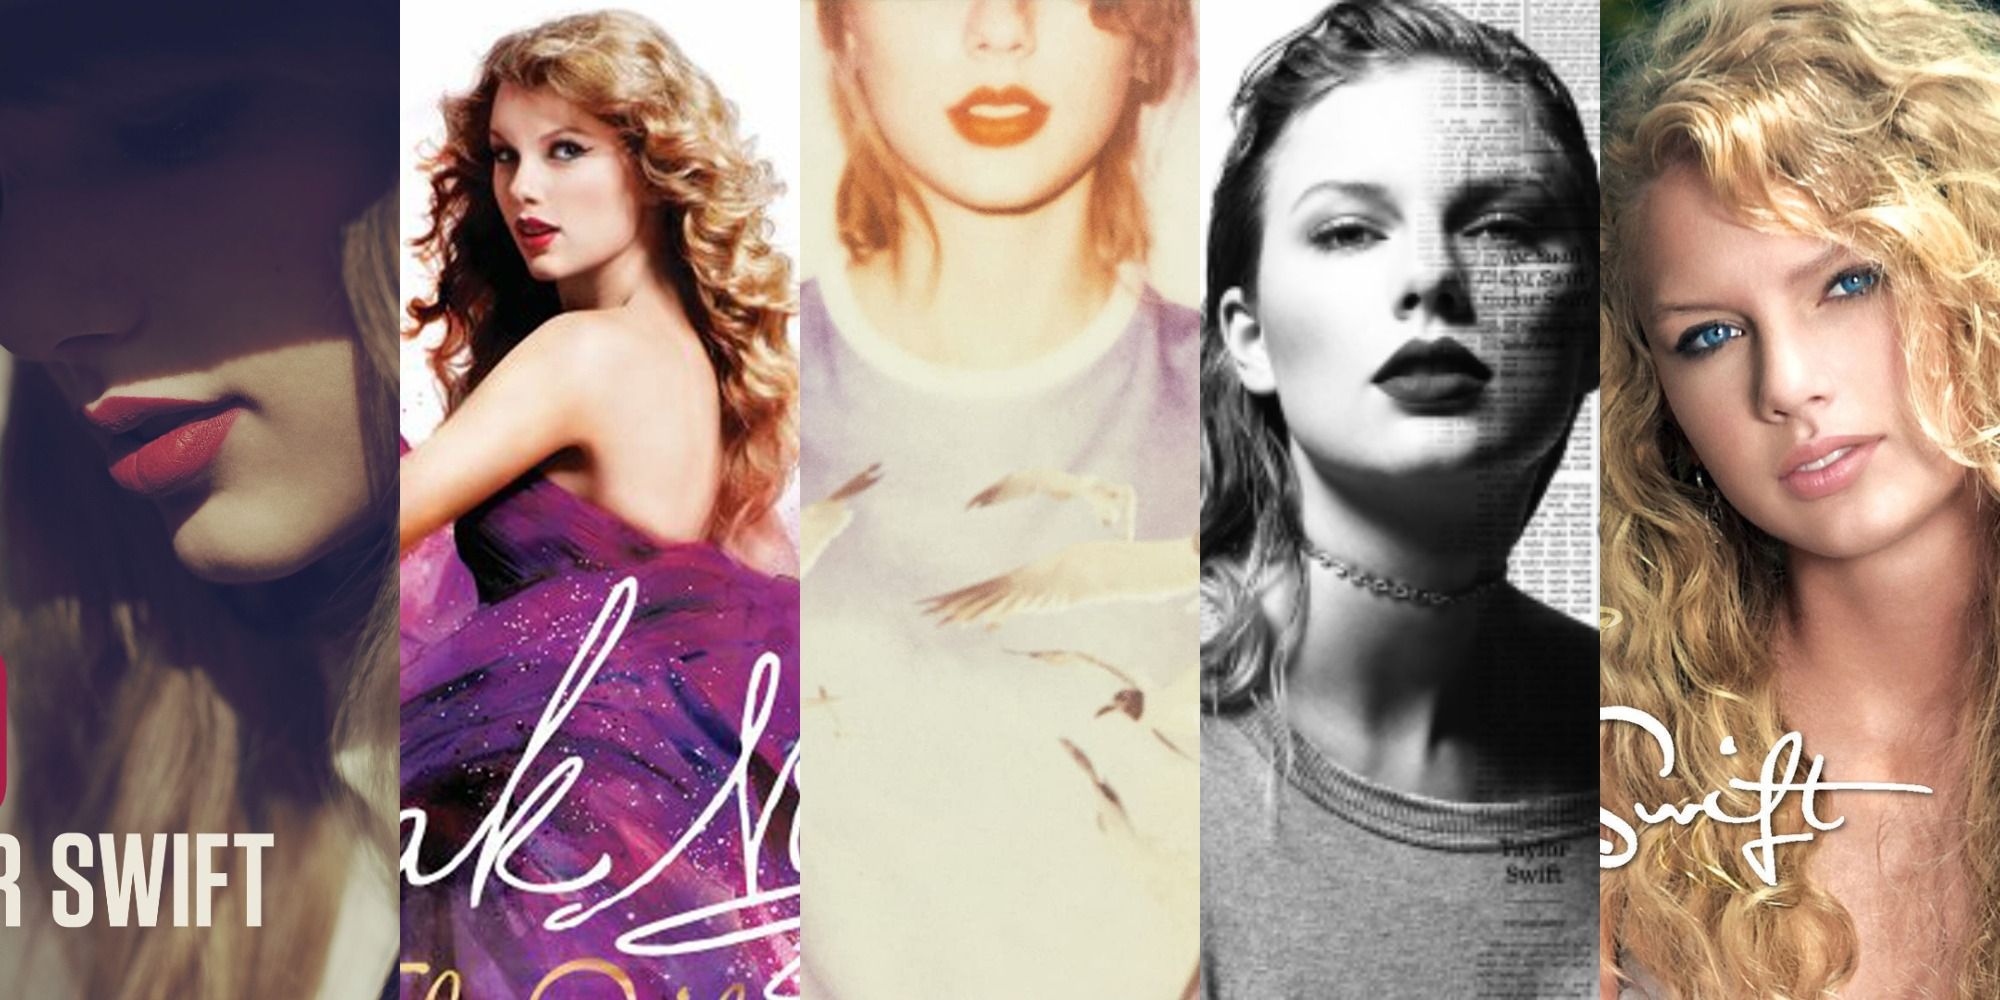 a collage of 5 taylor swift albums - red, speak now, 1989, reputation, taylor swift